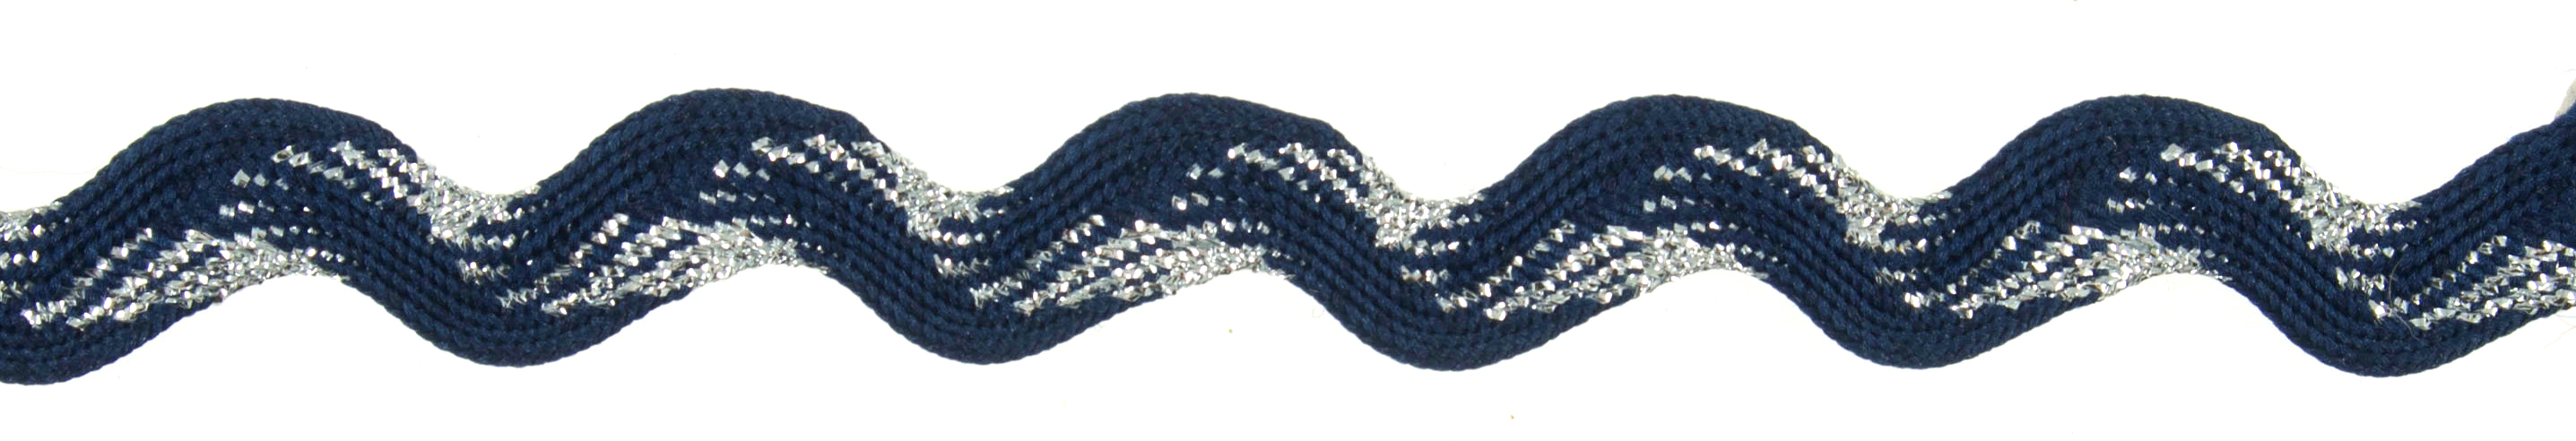 Picture of Trim: Ric Rac: Metallic: 25m x 10mm: Navy and Silver